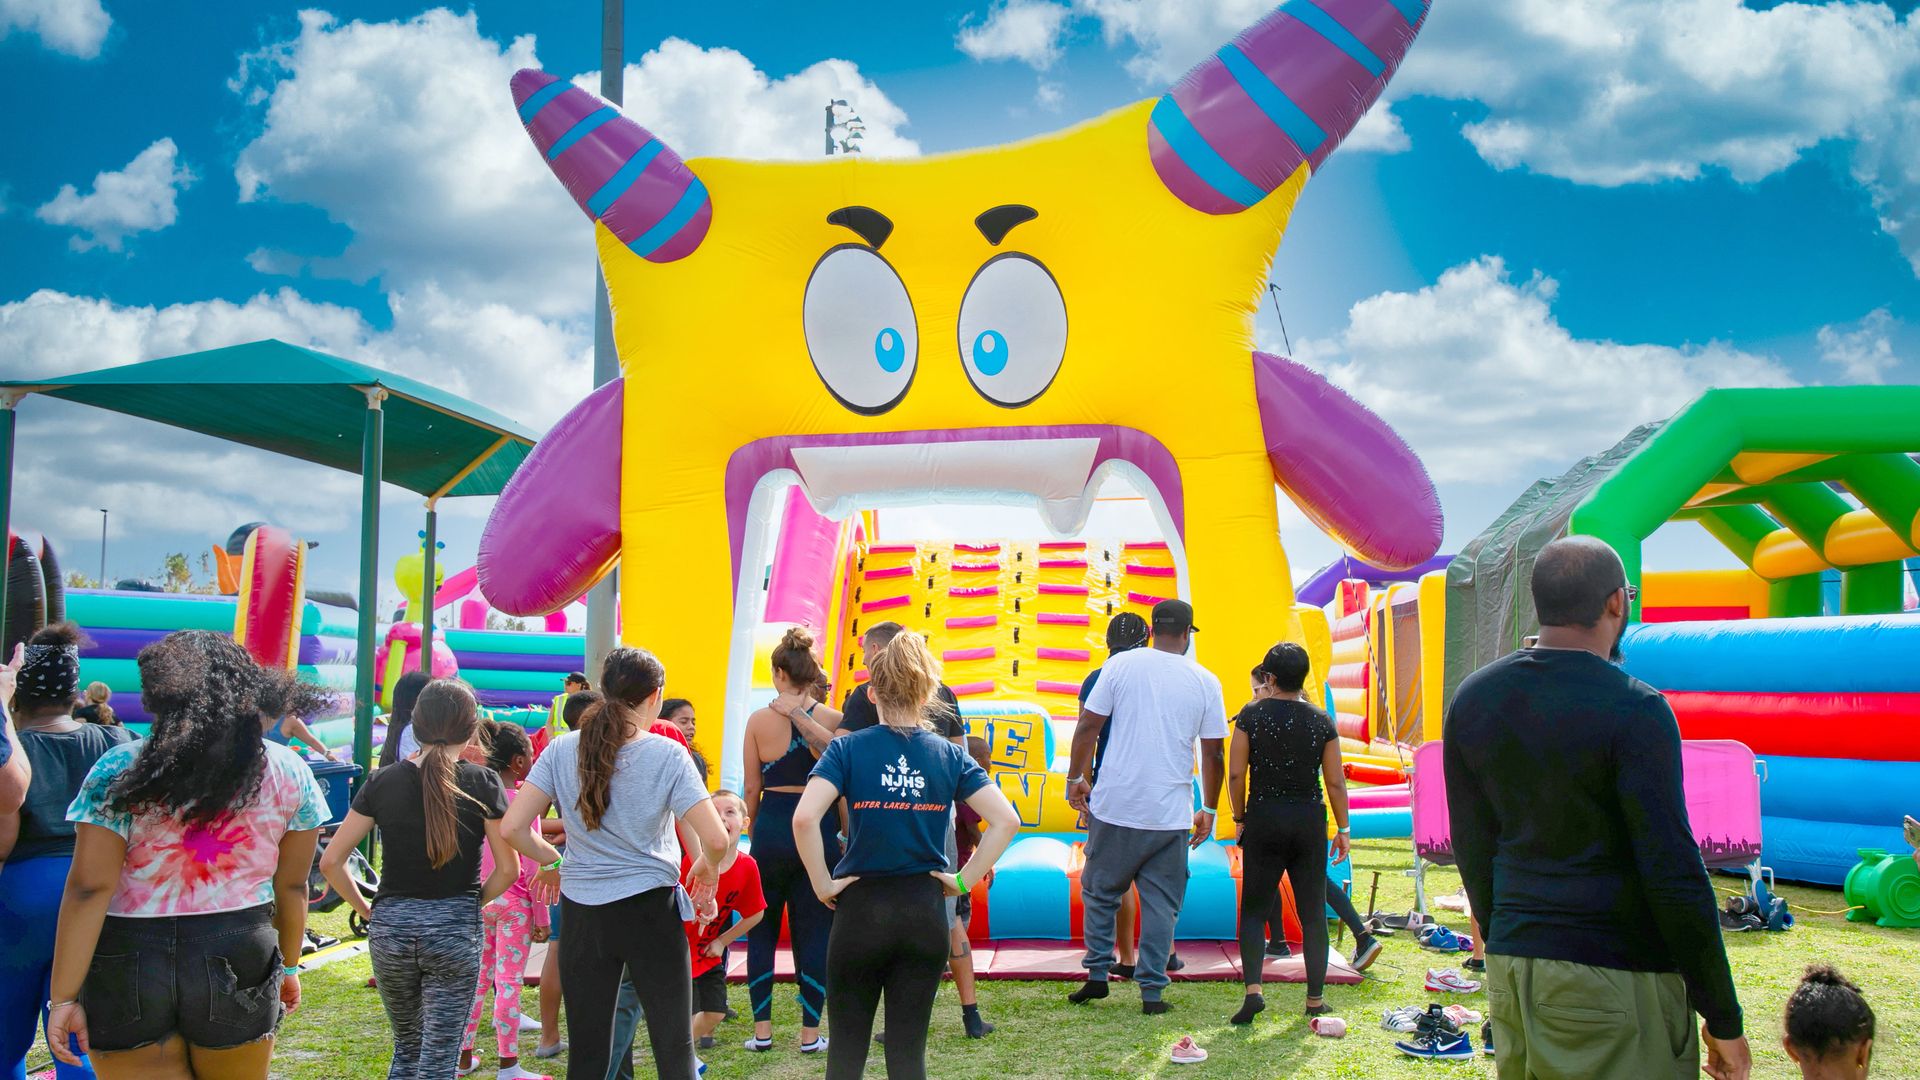 People standing outside a giant inflated square yellow face with a huge open mouth.